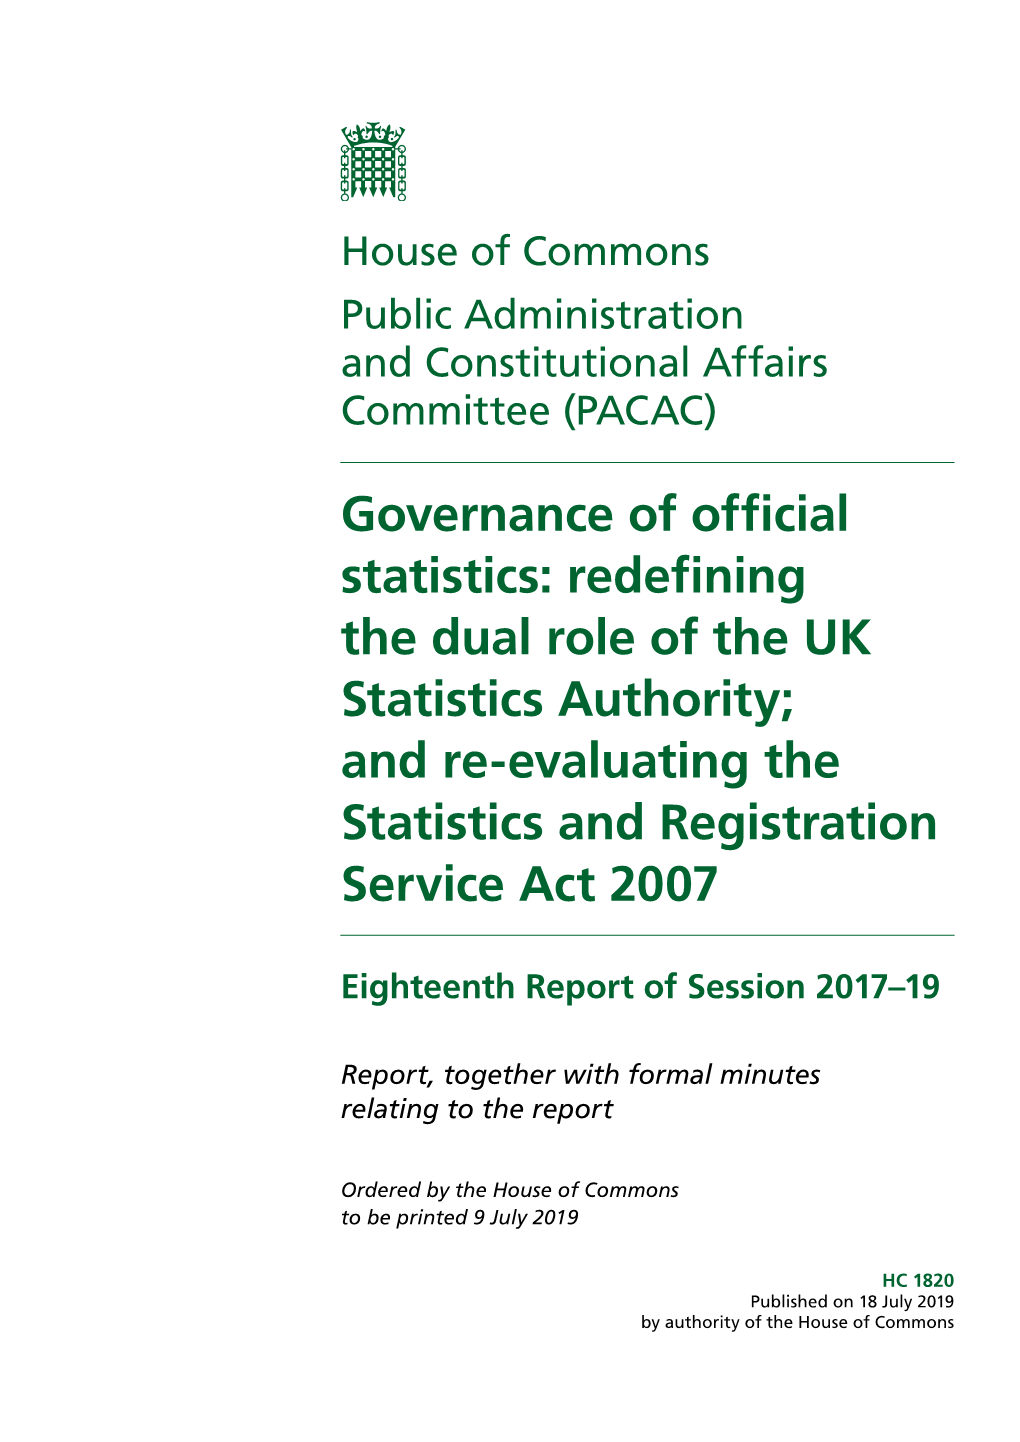 Governance of Official Statistics: Redefining the Dual Role of the UK Statistics Authority; and Re-Evaluating the Statistics and Registration Service Act 2007